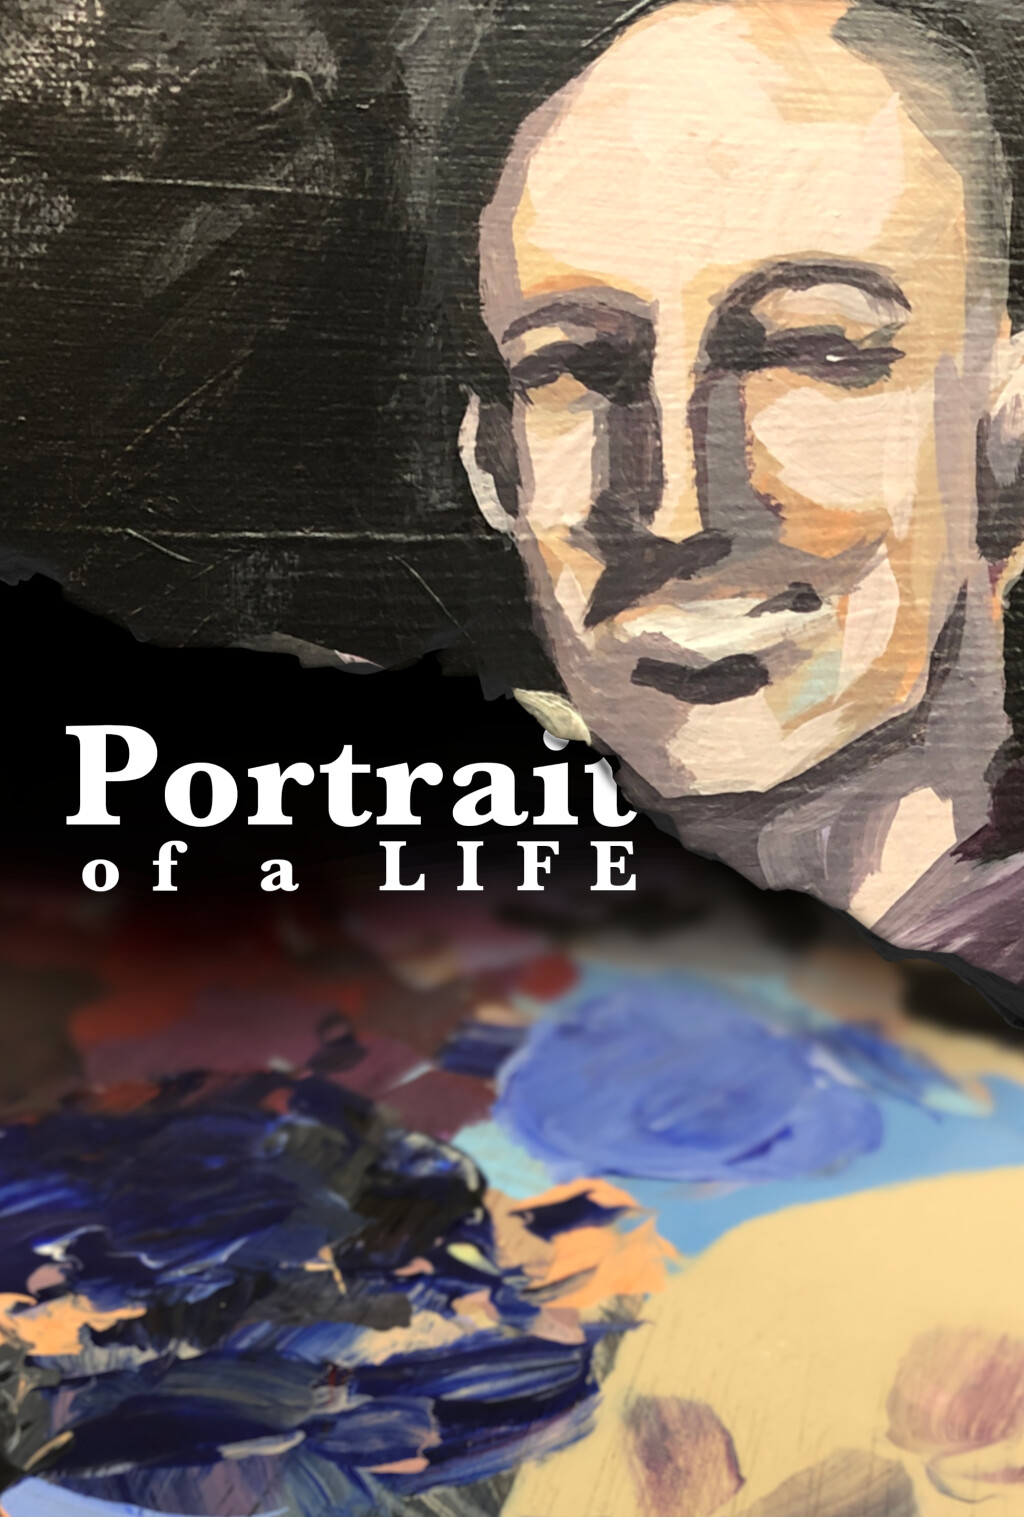 Filmposter for Portrait of a Life